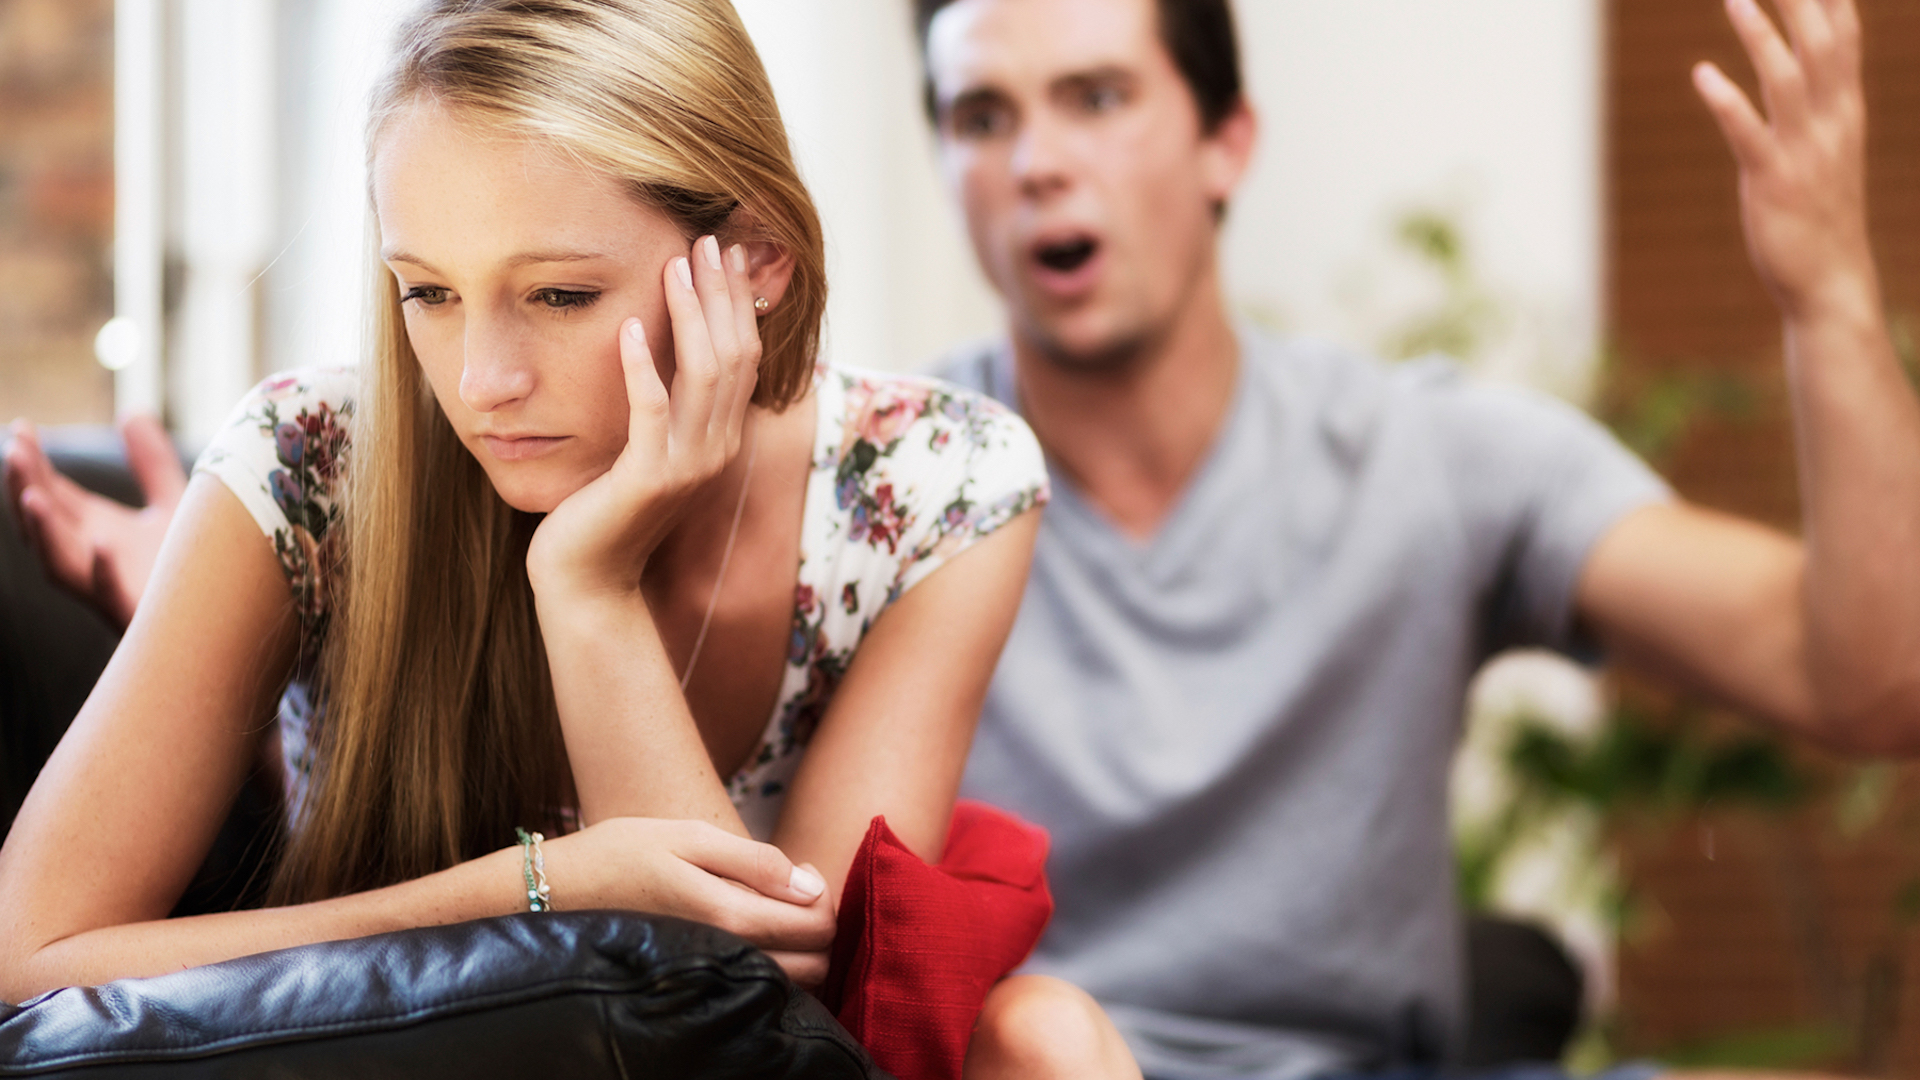 Domestic Violence Defense: What You Need To Know